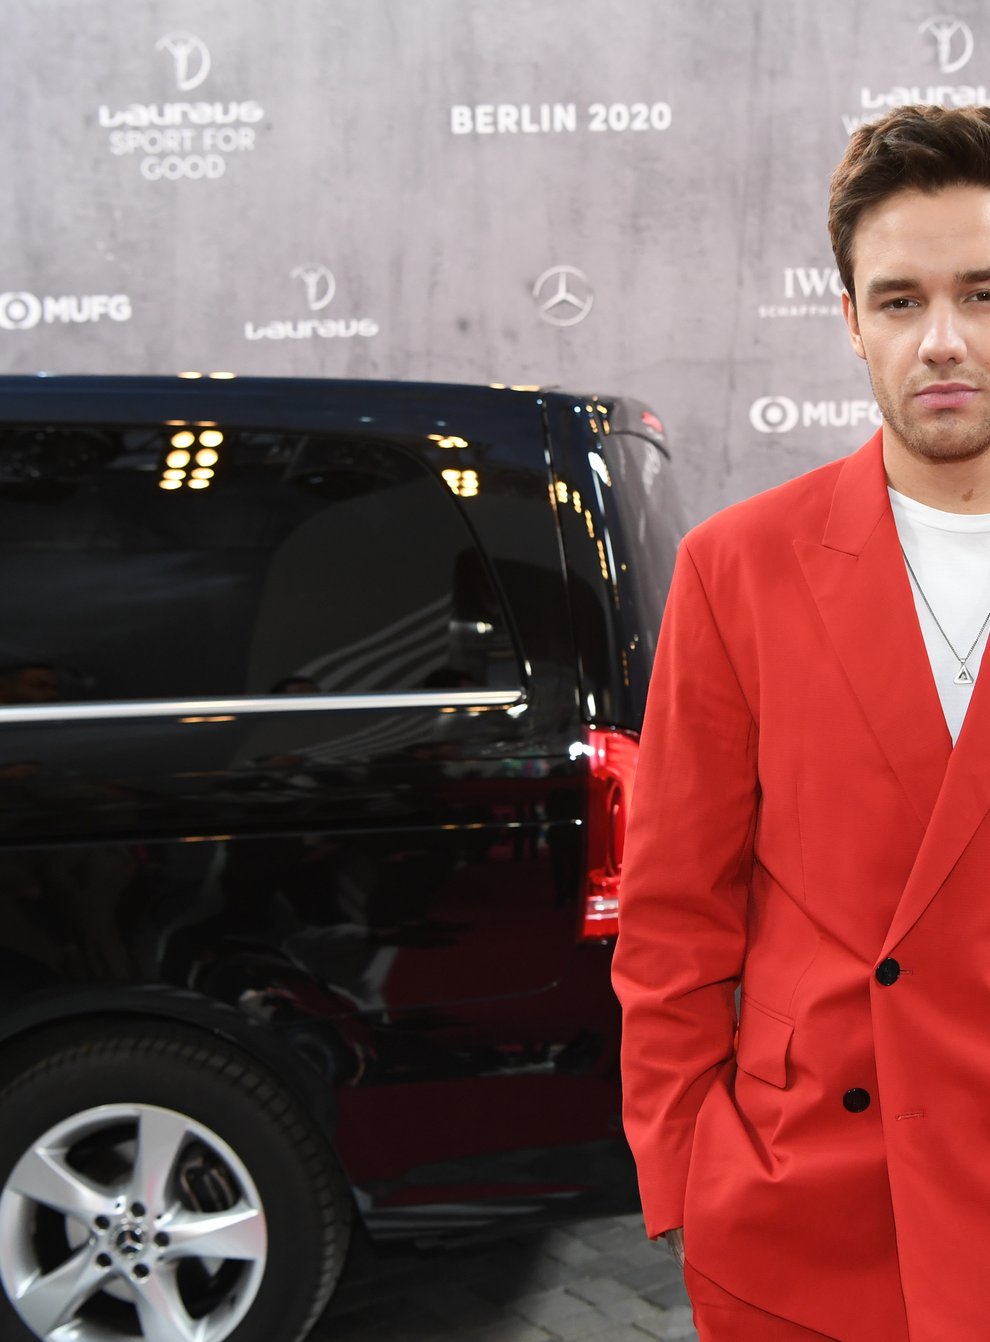 Payne was on the James Corden show when he hinted the group may get back together (PA Images)